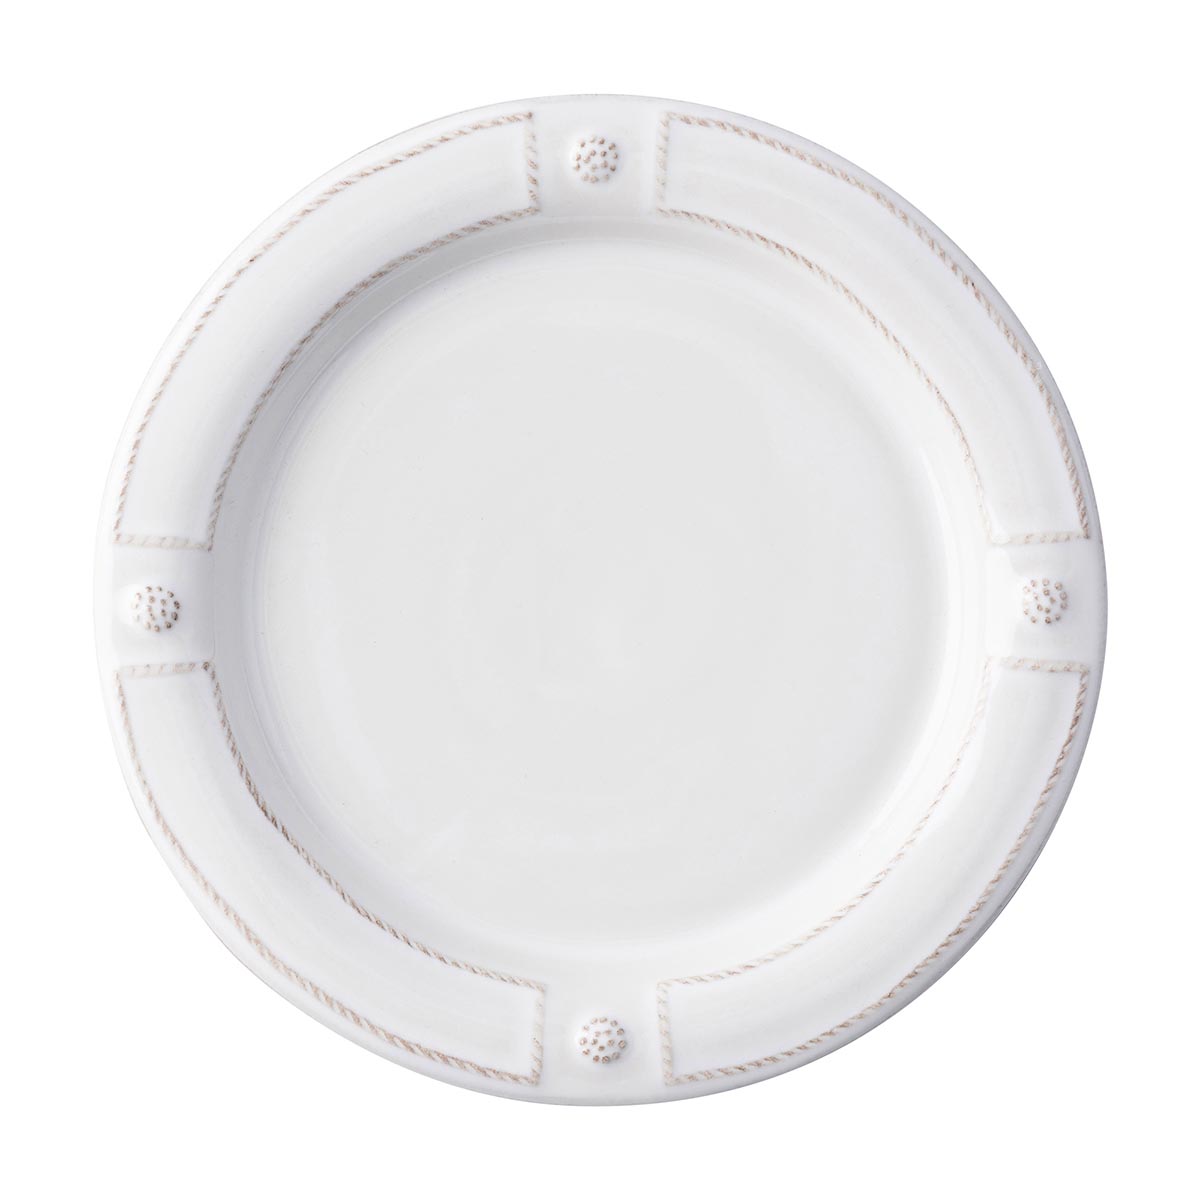 Berry & Thread French Panel Dinner Plate Set/4 - Whitewash | 2nd